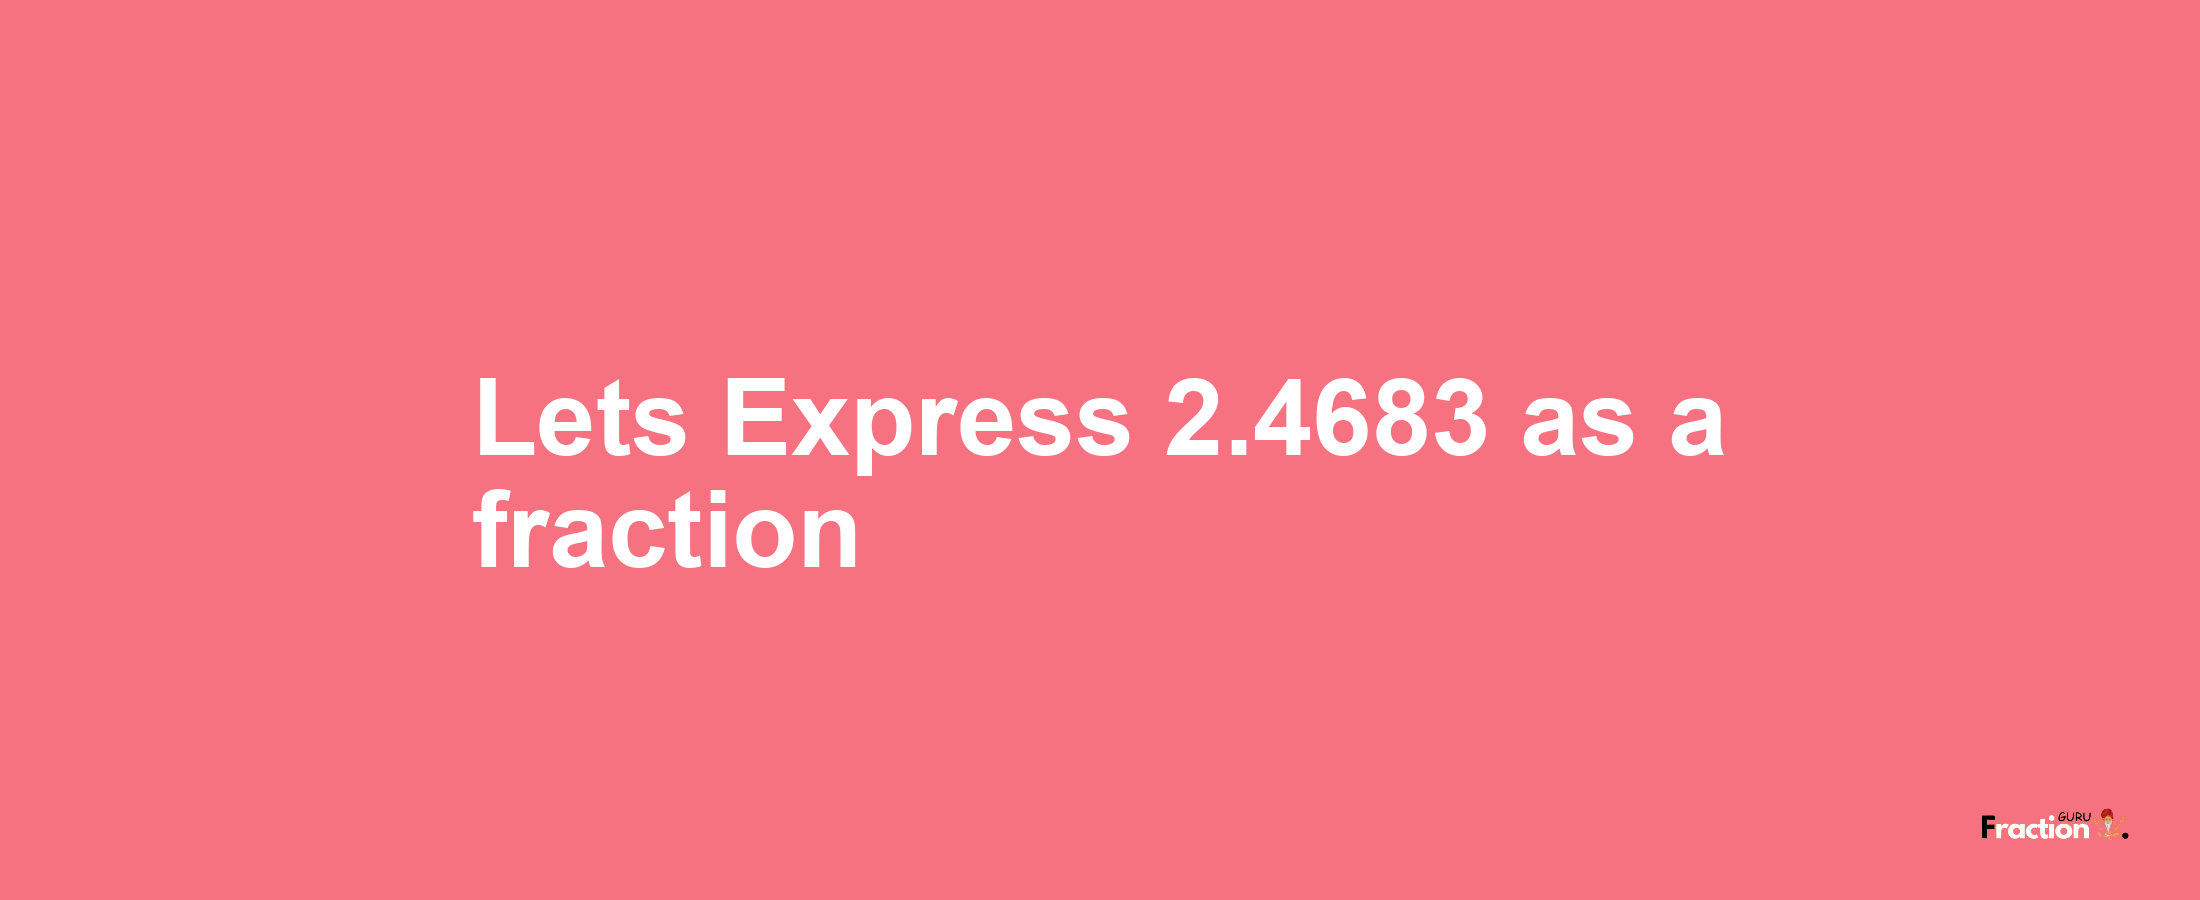 Lets Express 2.4683 as afraction